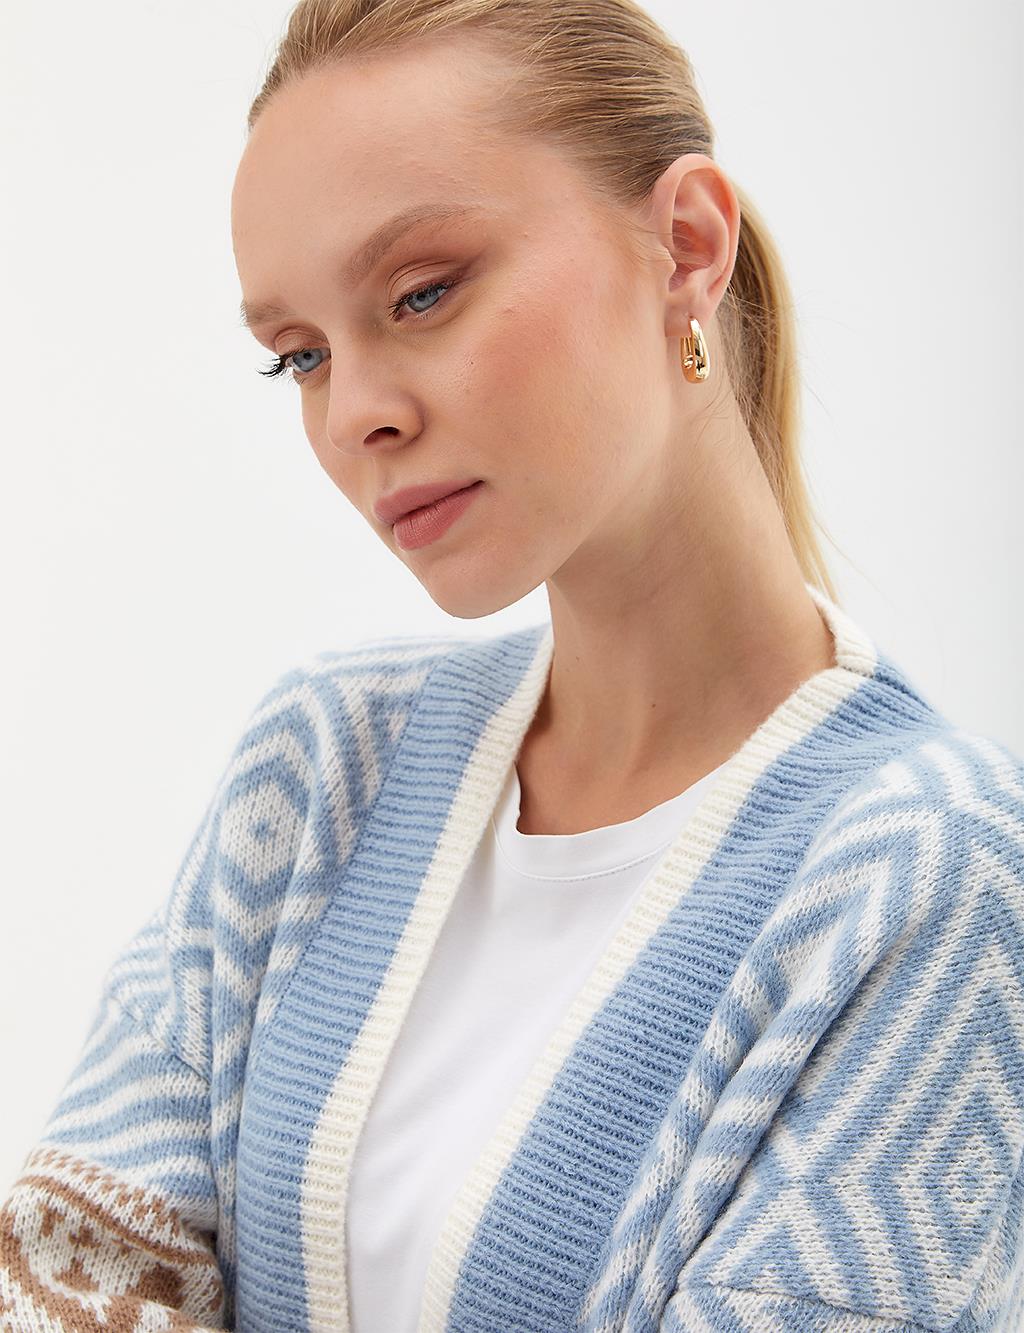 Exclusive Ethnic Patterned Knitwear Cardigan Blue